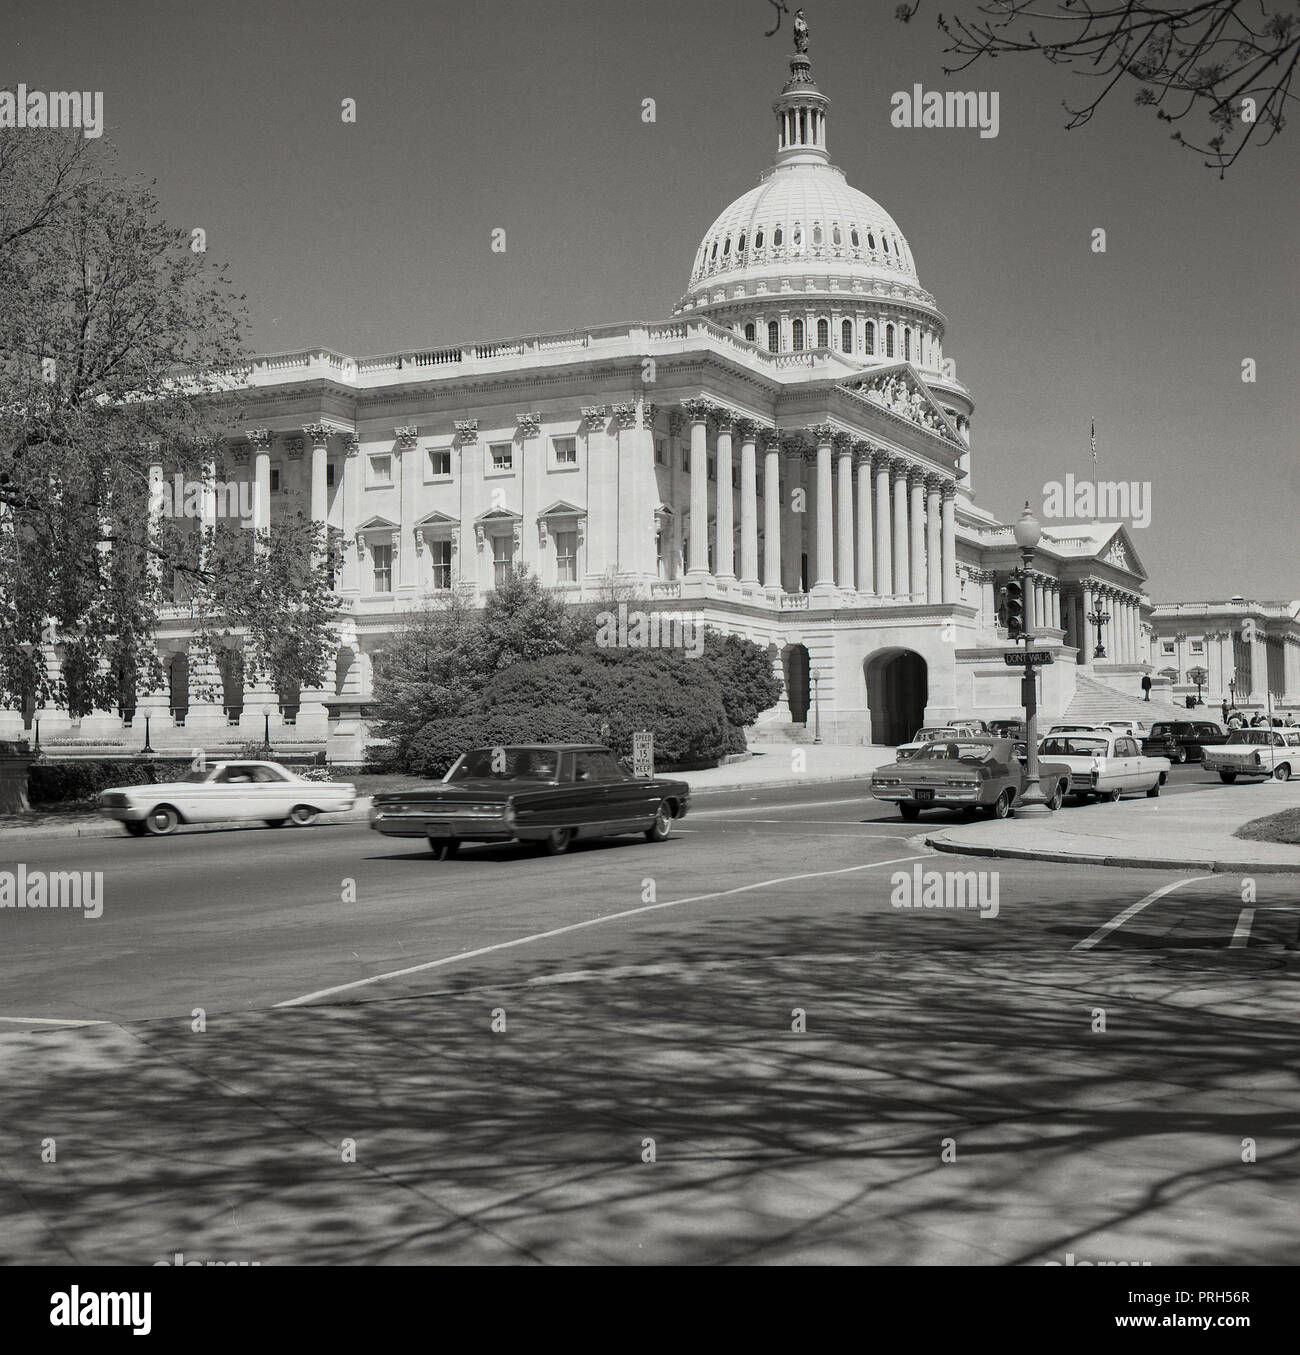 1950s, historical, summertime and across a road with American cars of the era, a view of the iconic, domed building of the United States Capitol, where the US congress meets. The House of Representatives and the Senate meet there and it is the centre of the legislative branch of the US federal government, Stock Photo